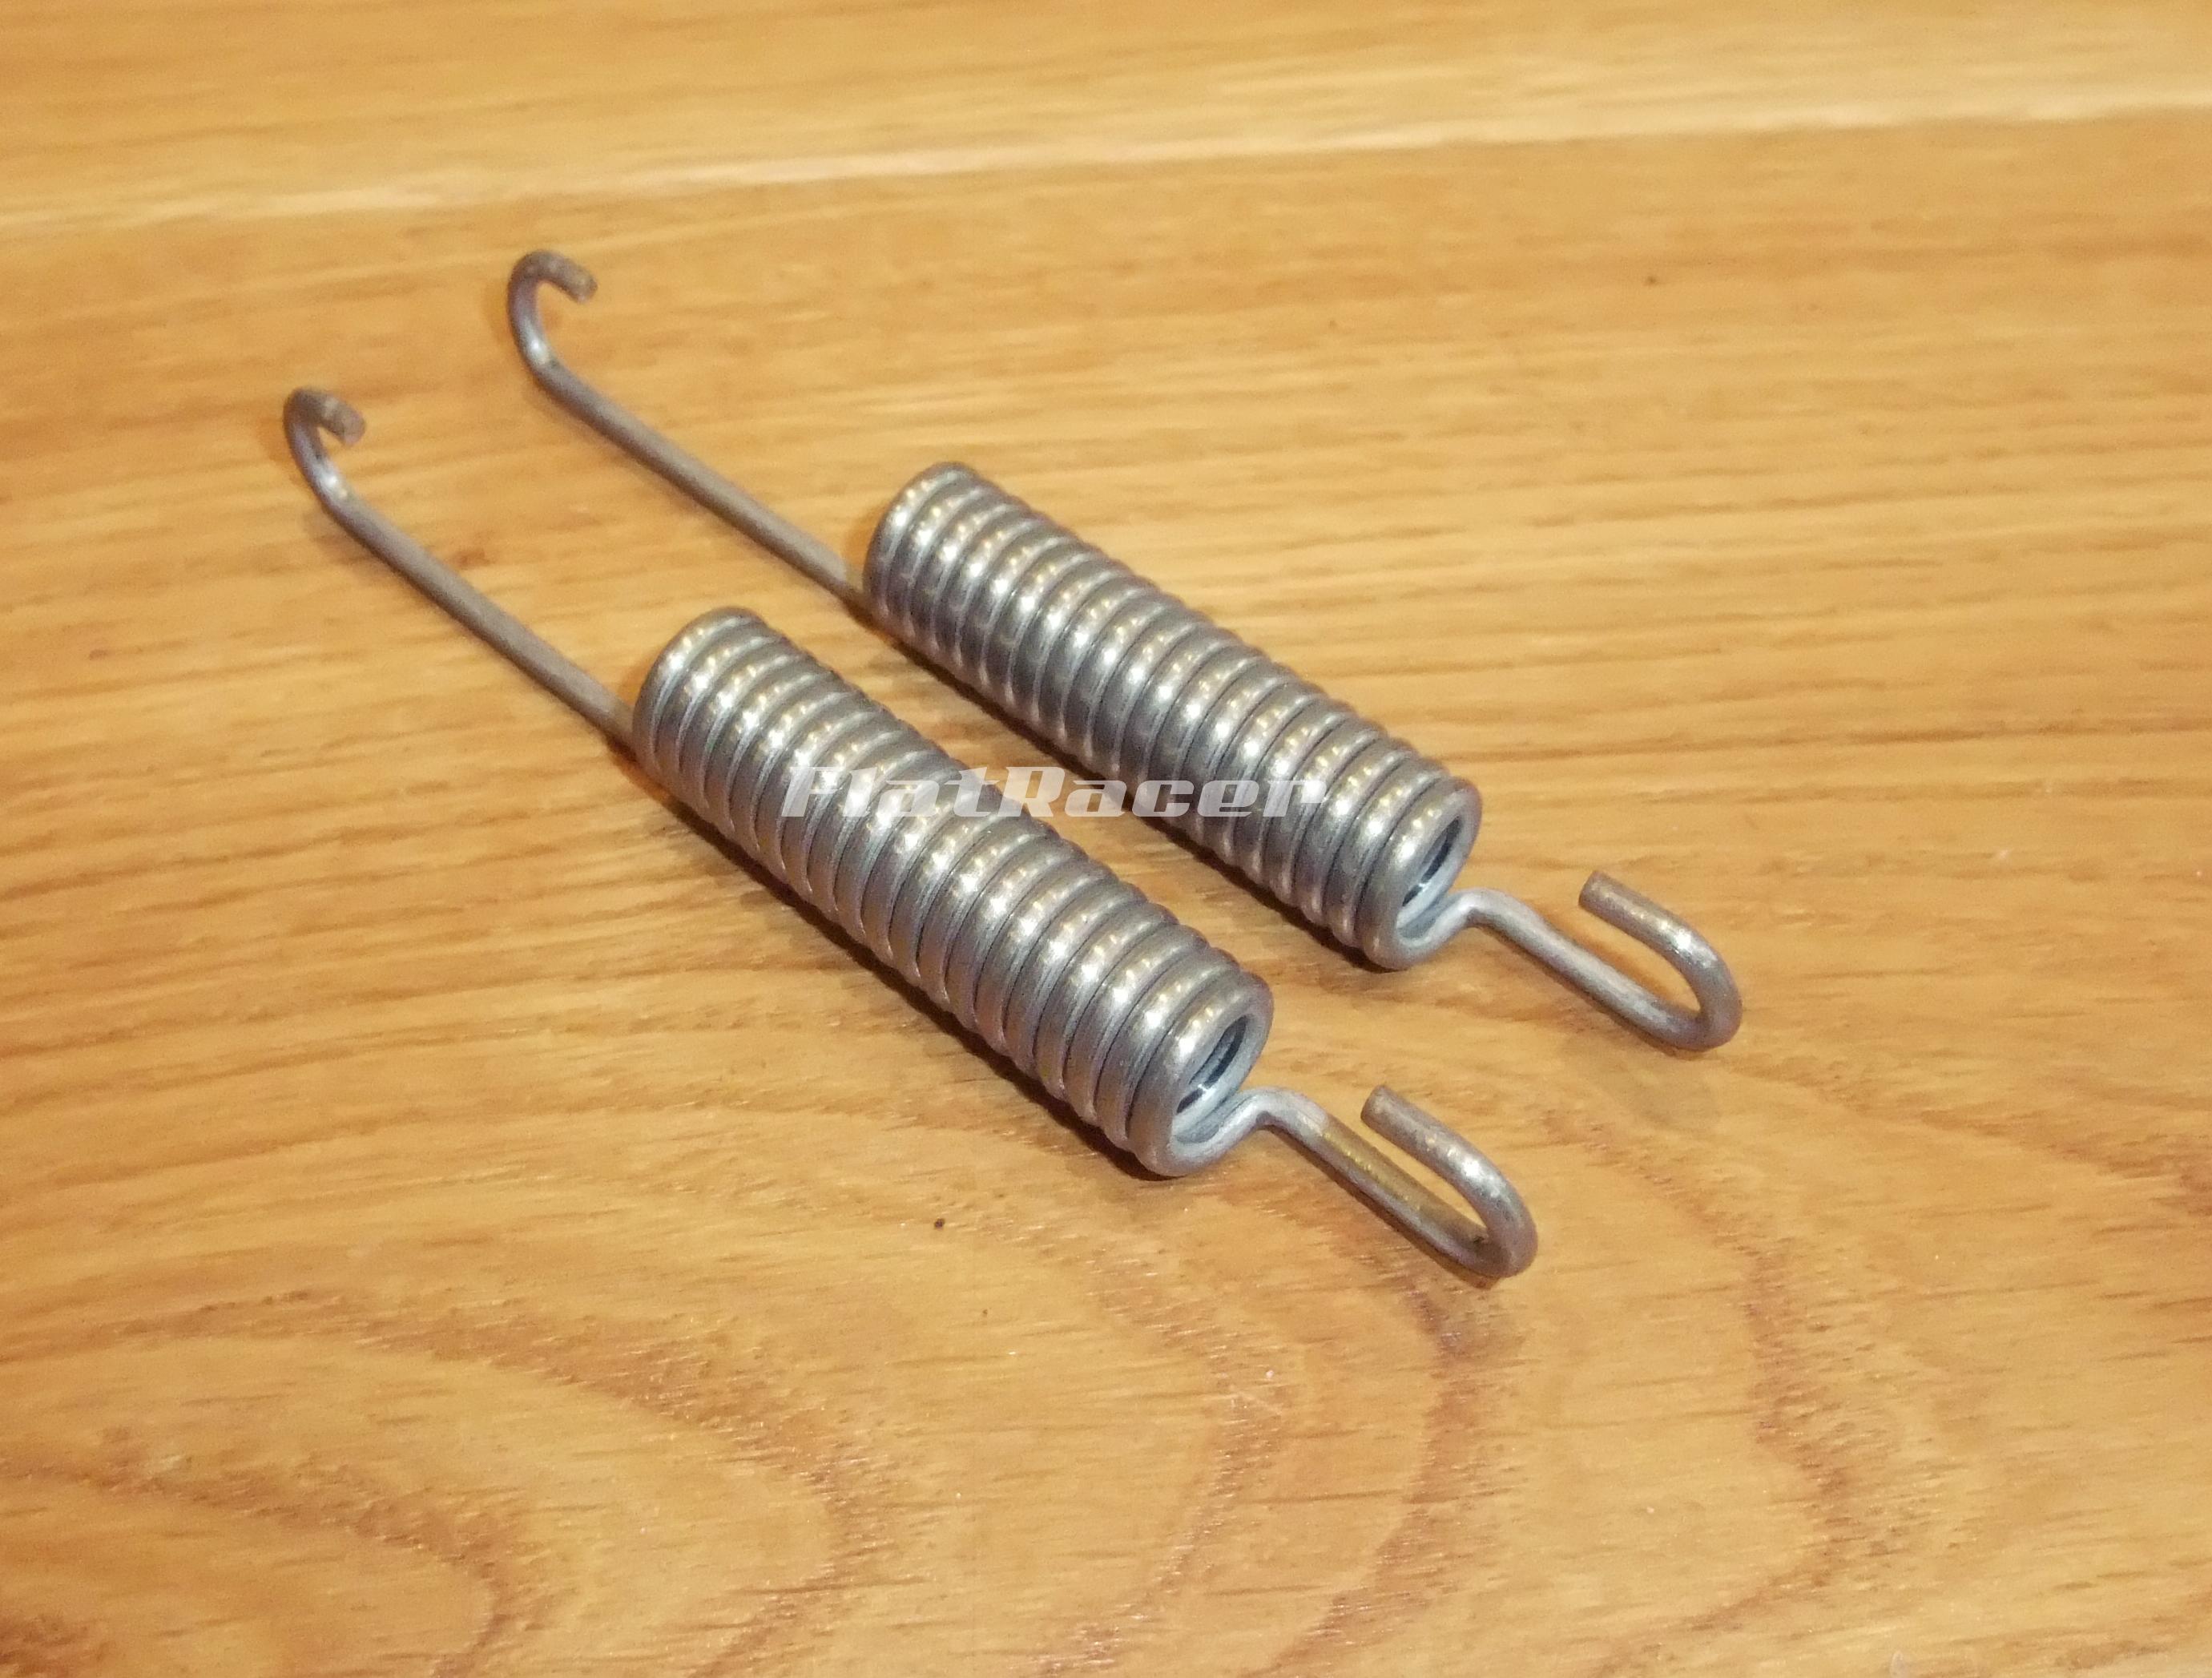 BMW Airhead Boxer post 1982 stainless steel centre stand springs - 114mm